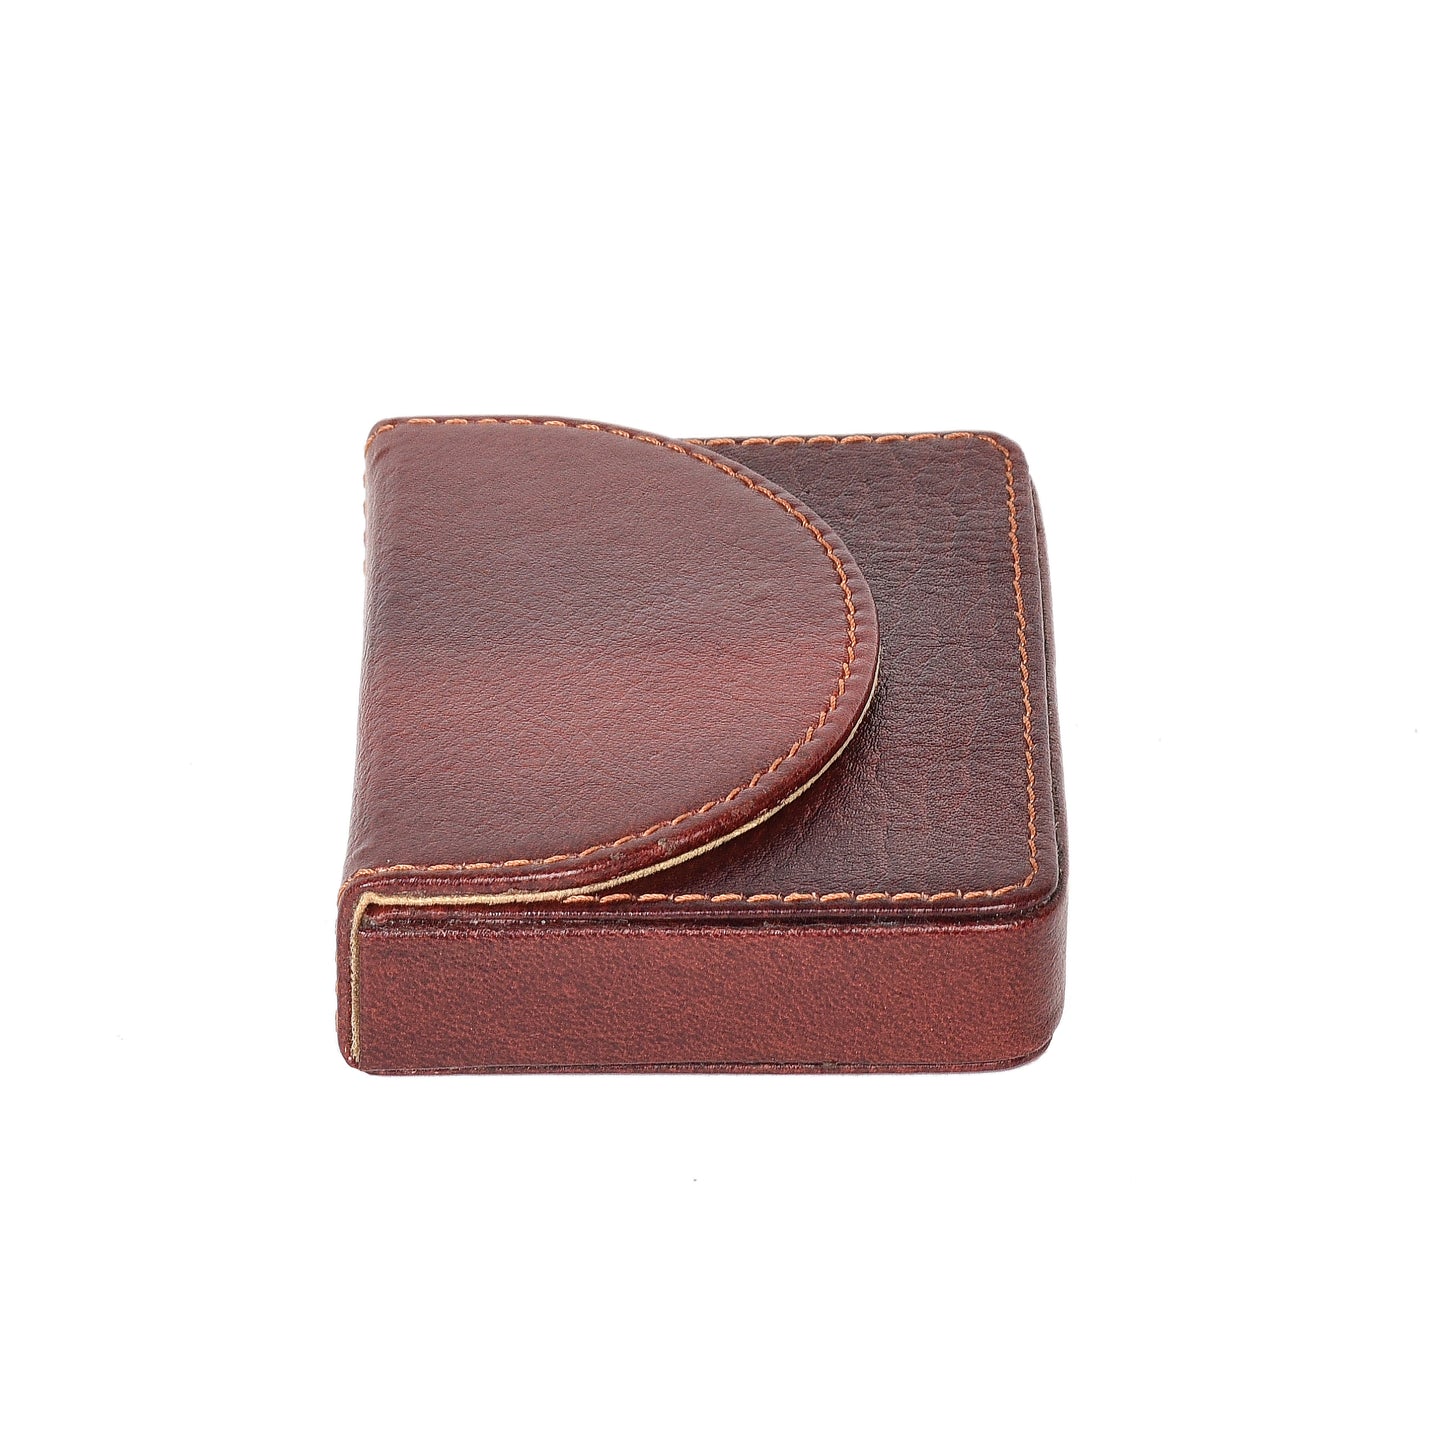 Genuine Leather Credit Card Holder Business Card Organizer Leather Card Case